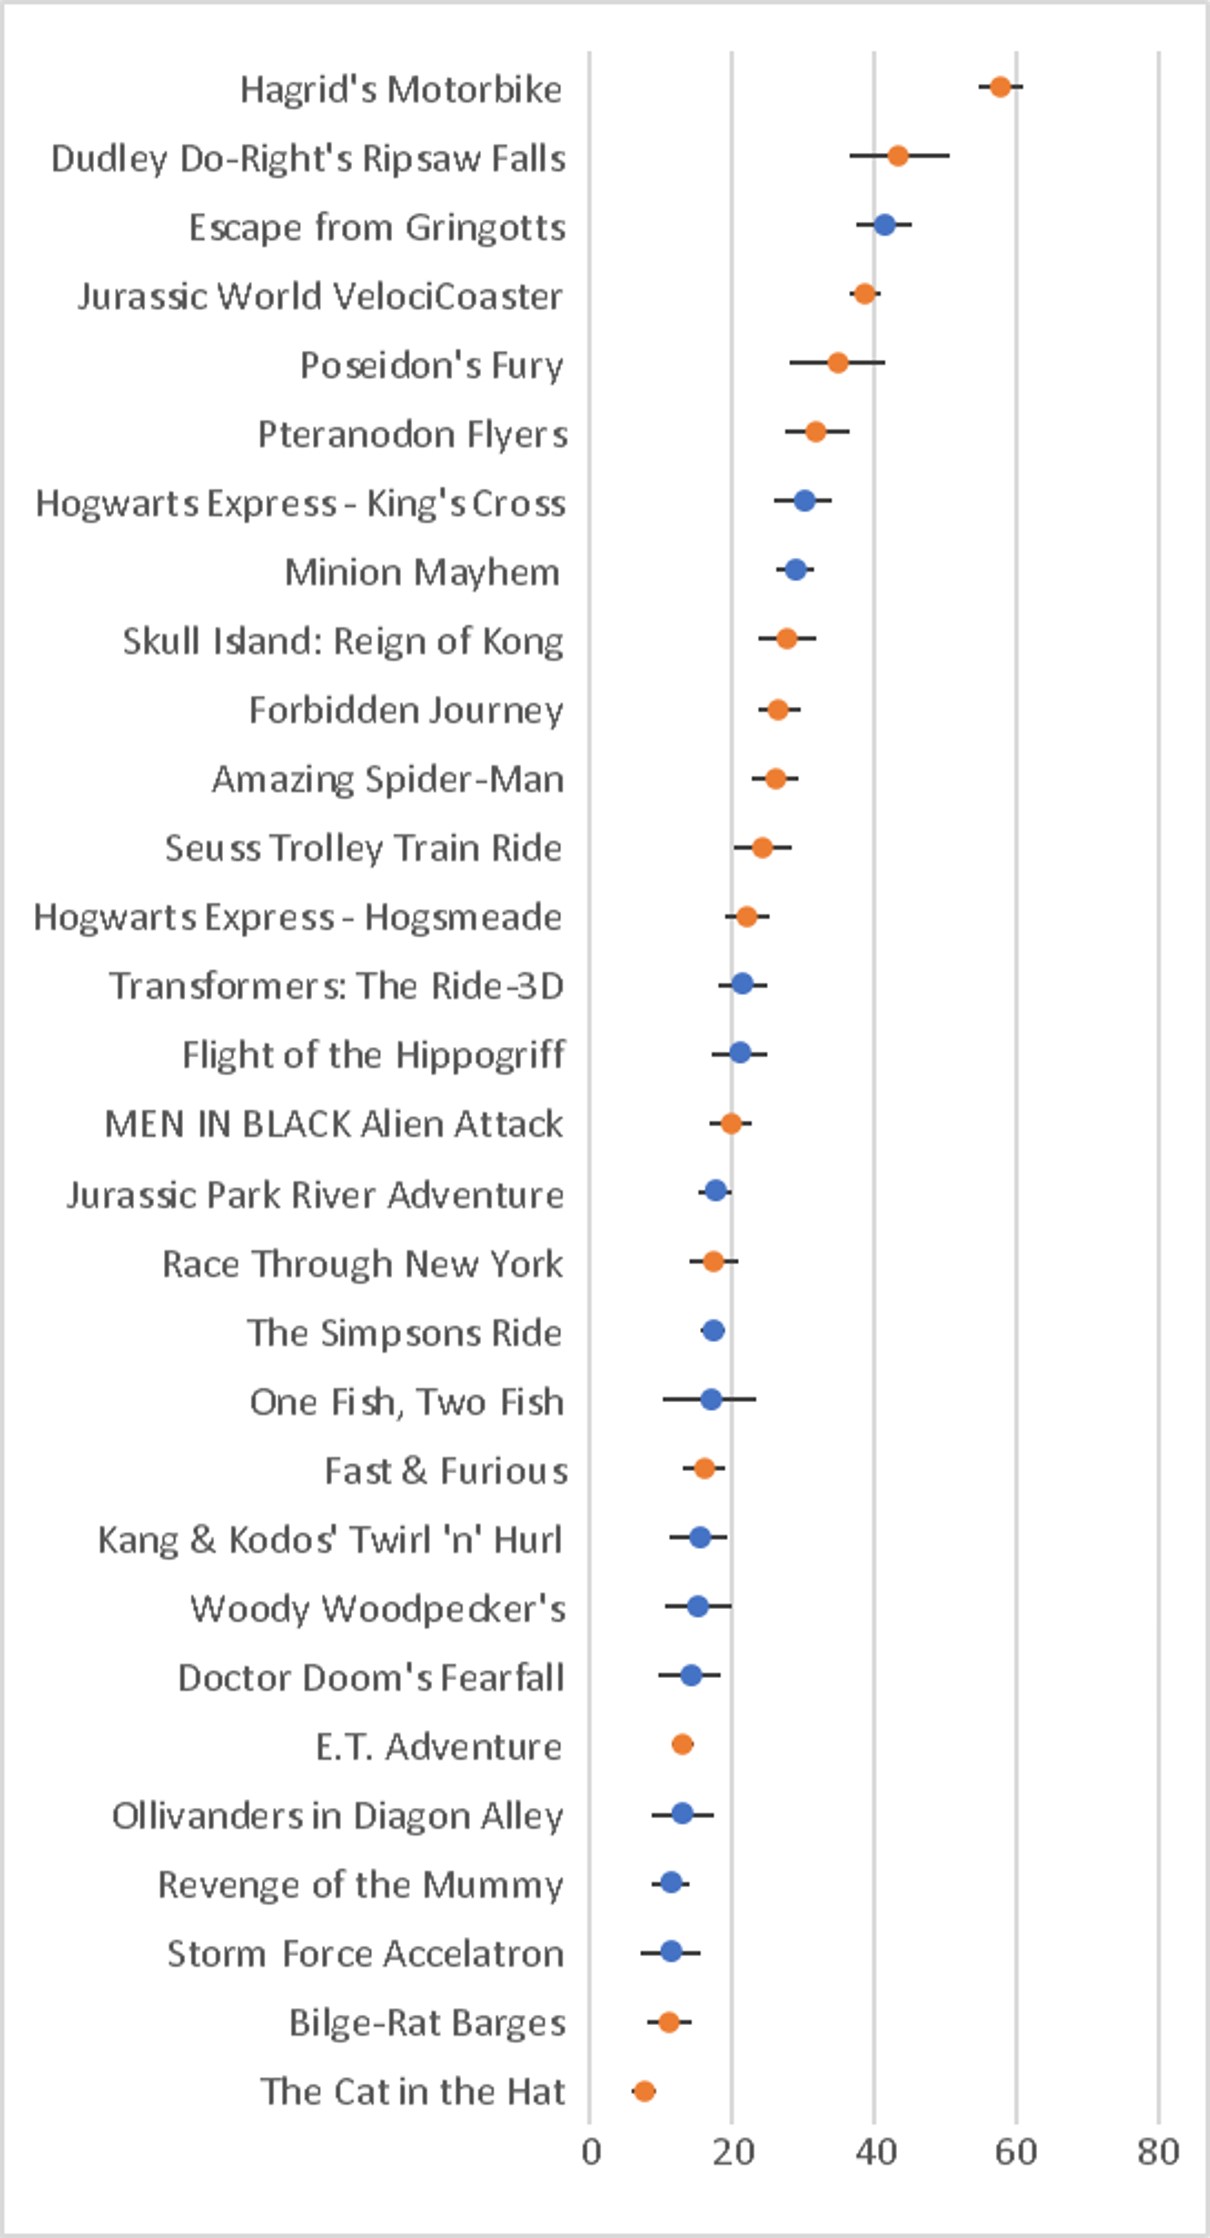 Universal Orlando ride wait times based on crowd levels (including Diagon  Alley)